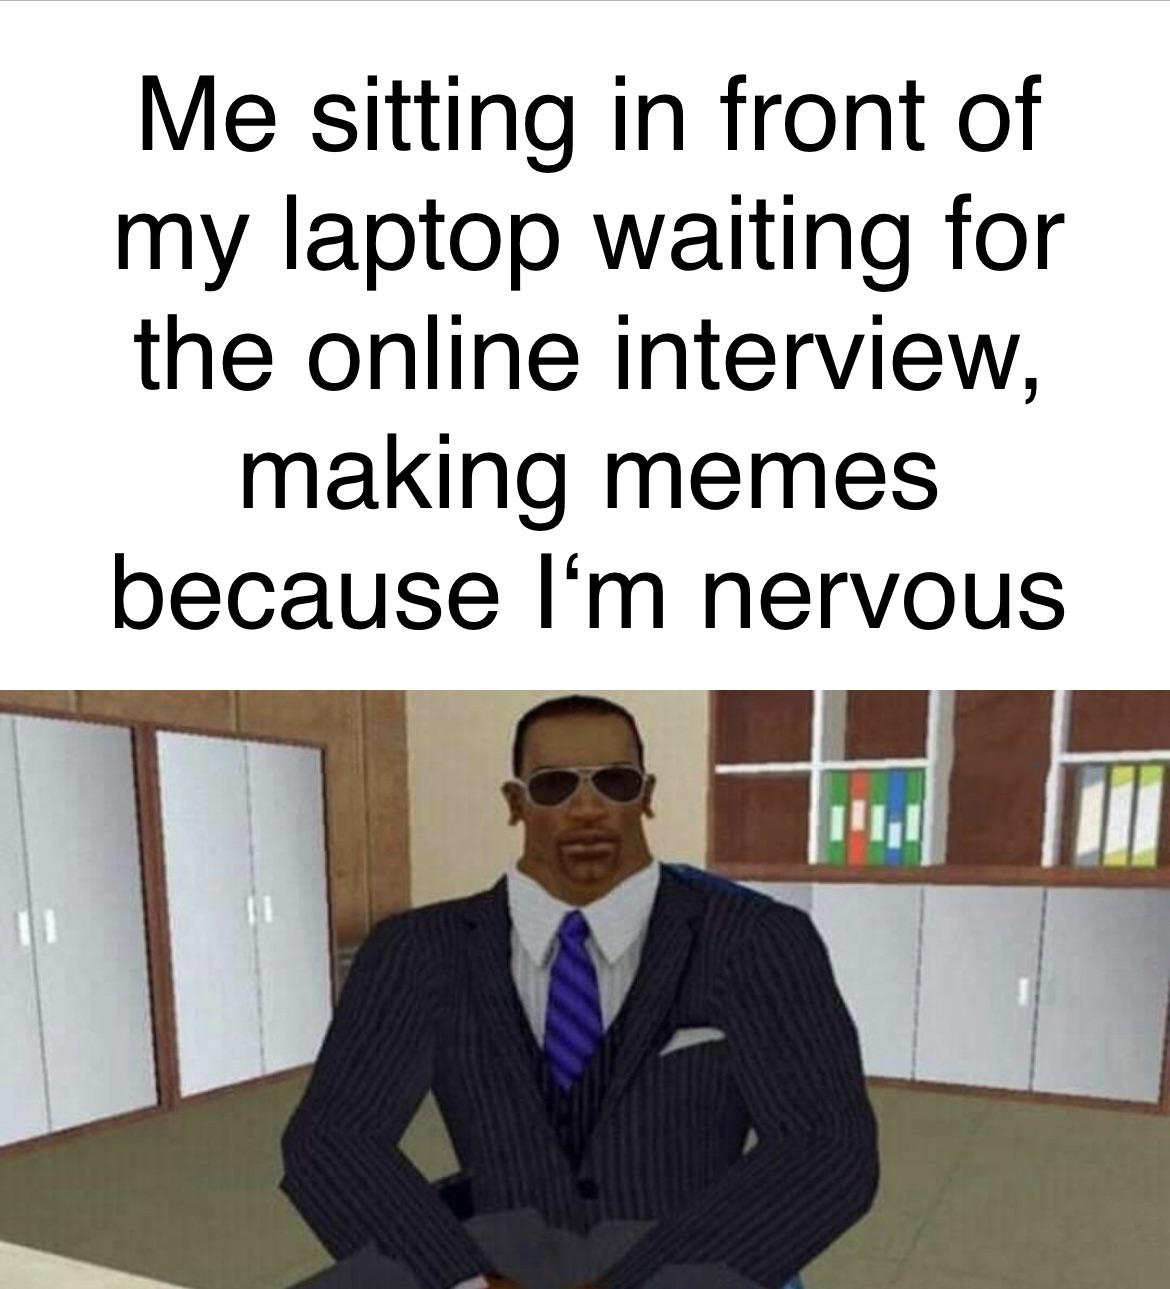 Gaming memes - communication - Me sitting in front of my laptop waiting for the online interview, making memes because I'm nervous